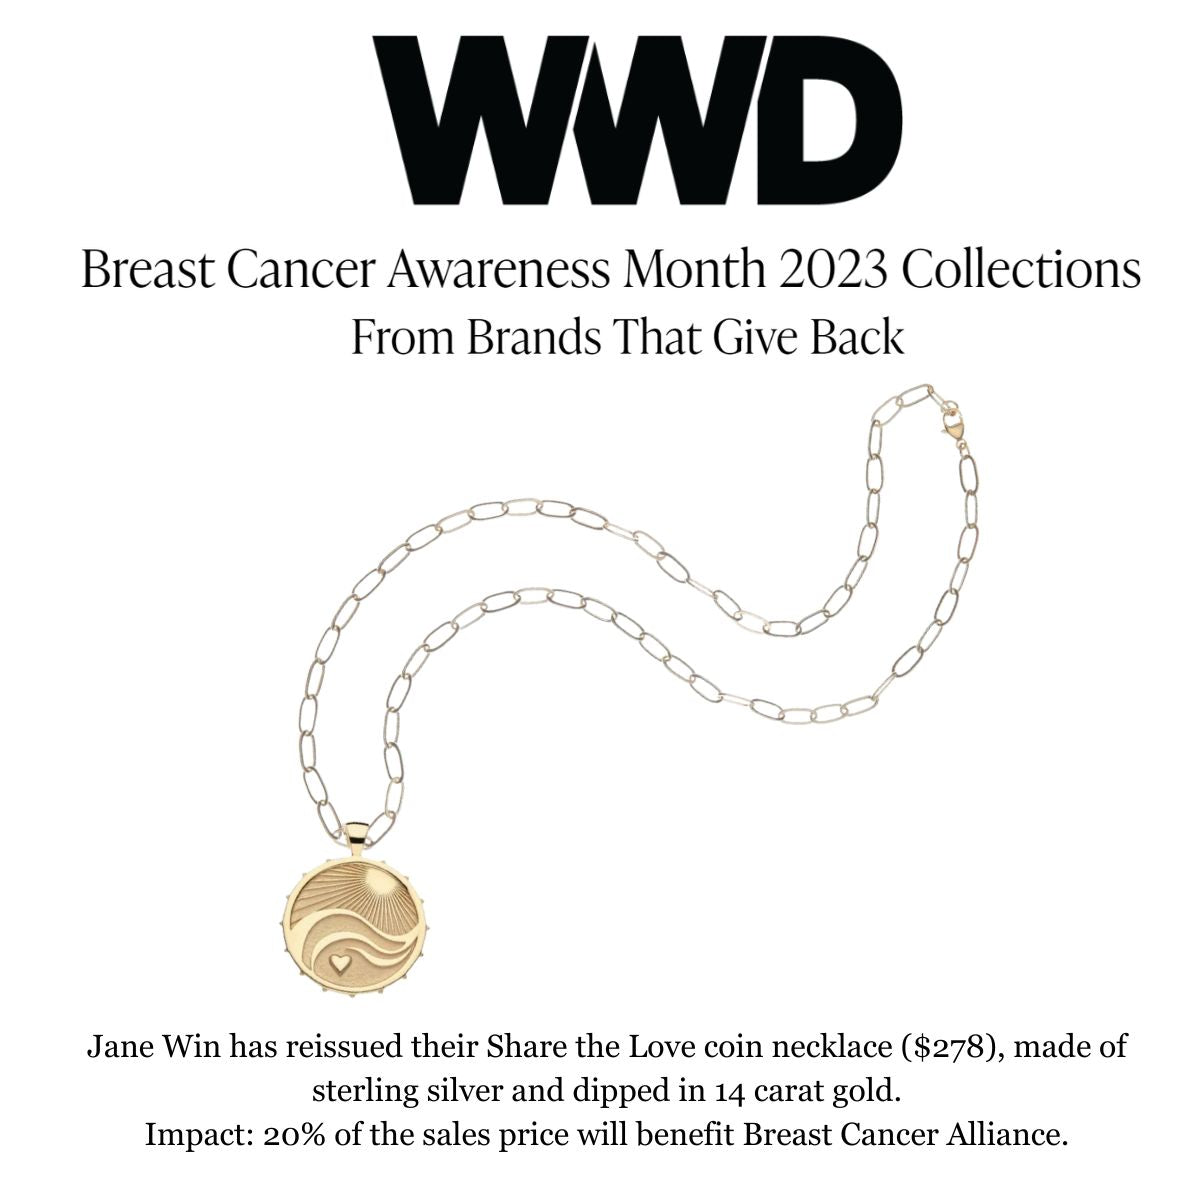 Press Highlight: WWD Brands That Give Back during Breast Cancer Awareness Month